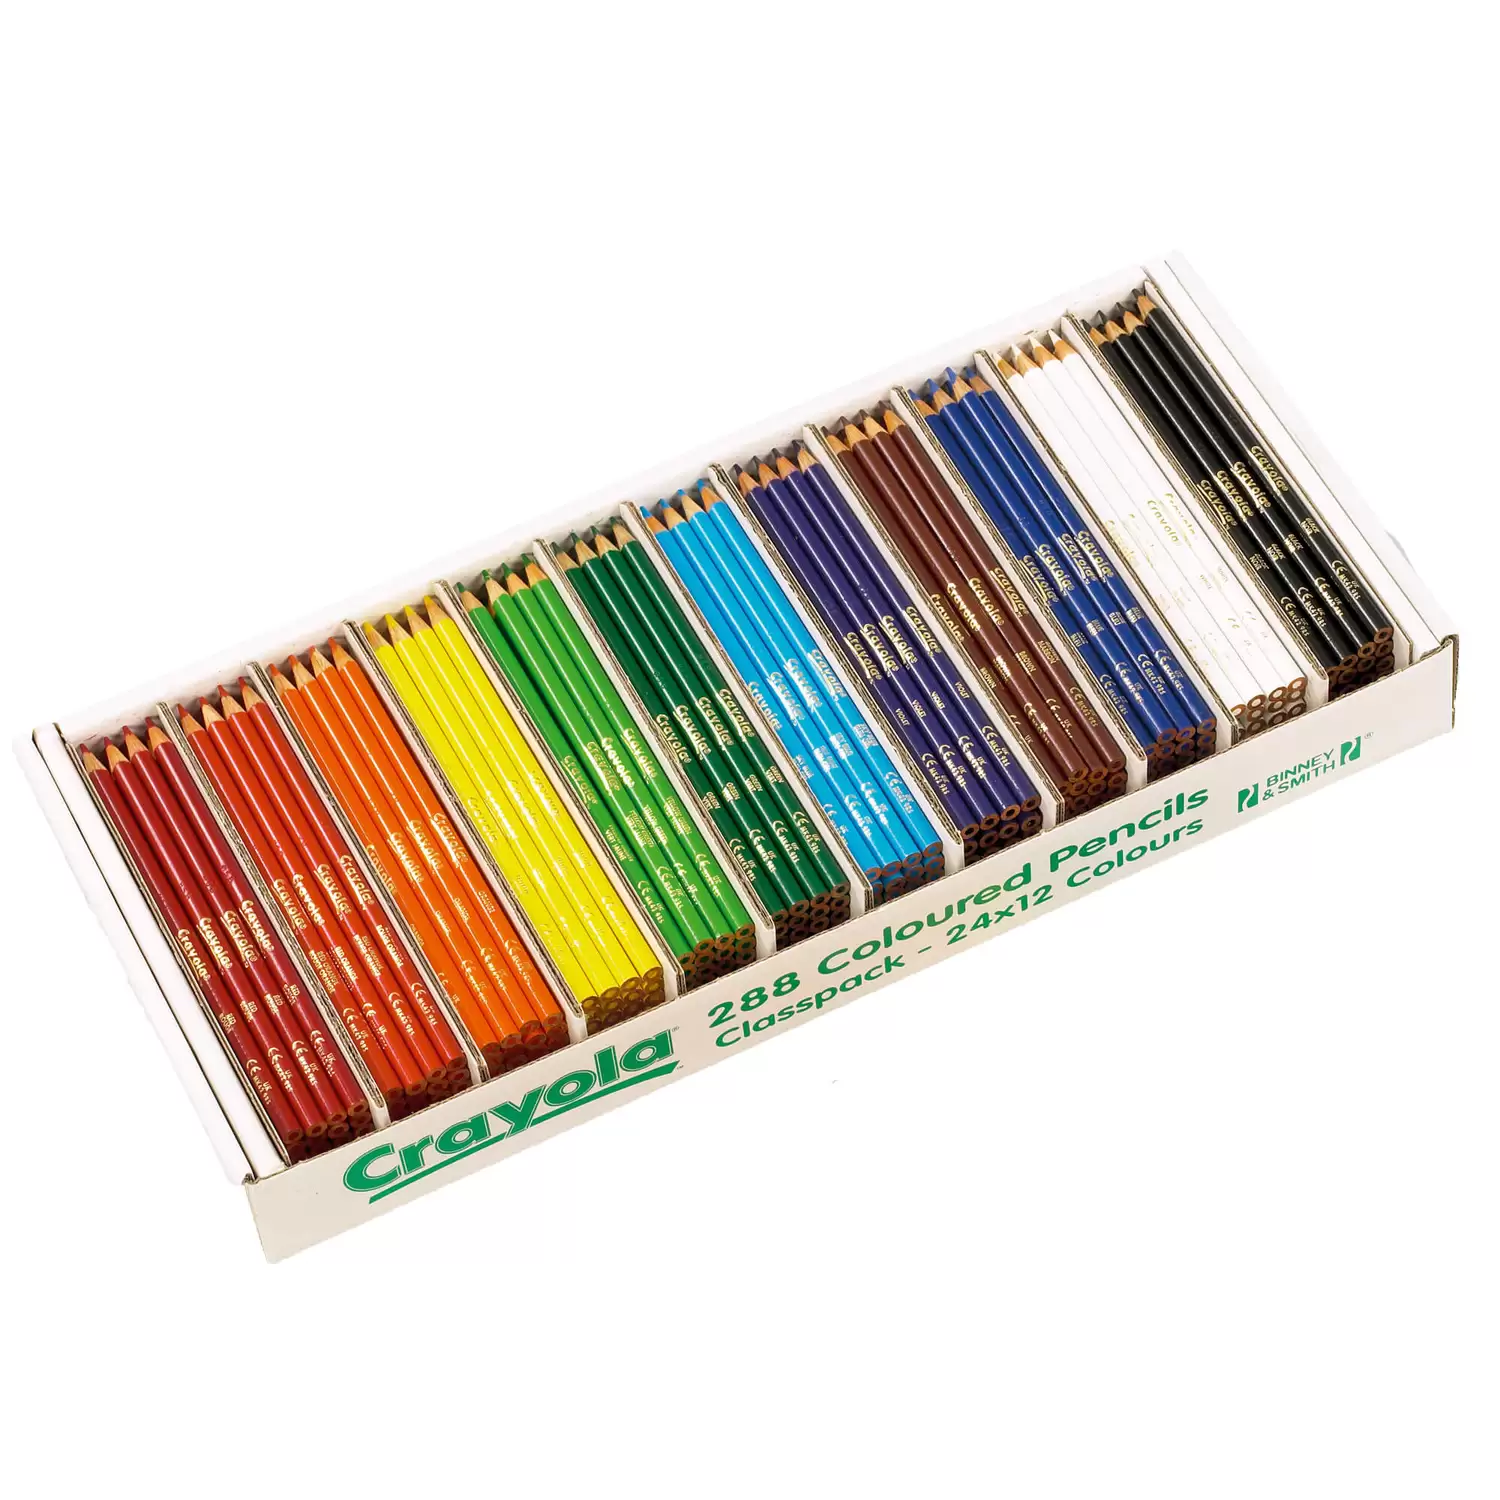 Crayola 50 Count Colored Pencils: What's Inside the Box  Crayola colored  pencils, Colored pencils, Colored pencil set